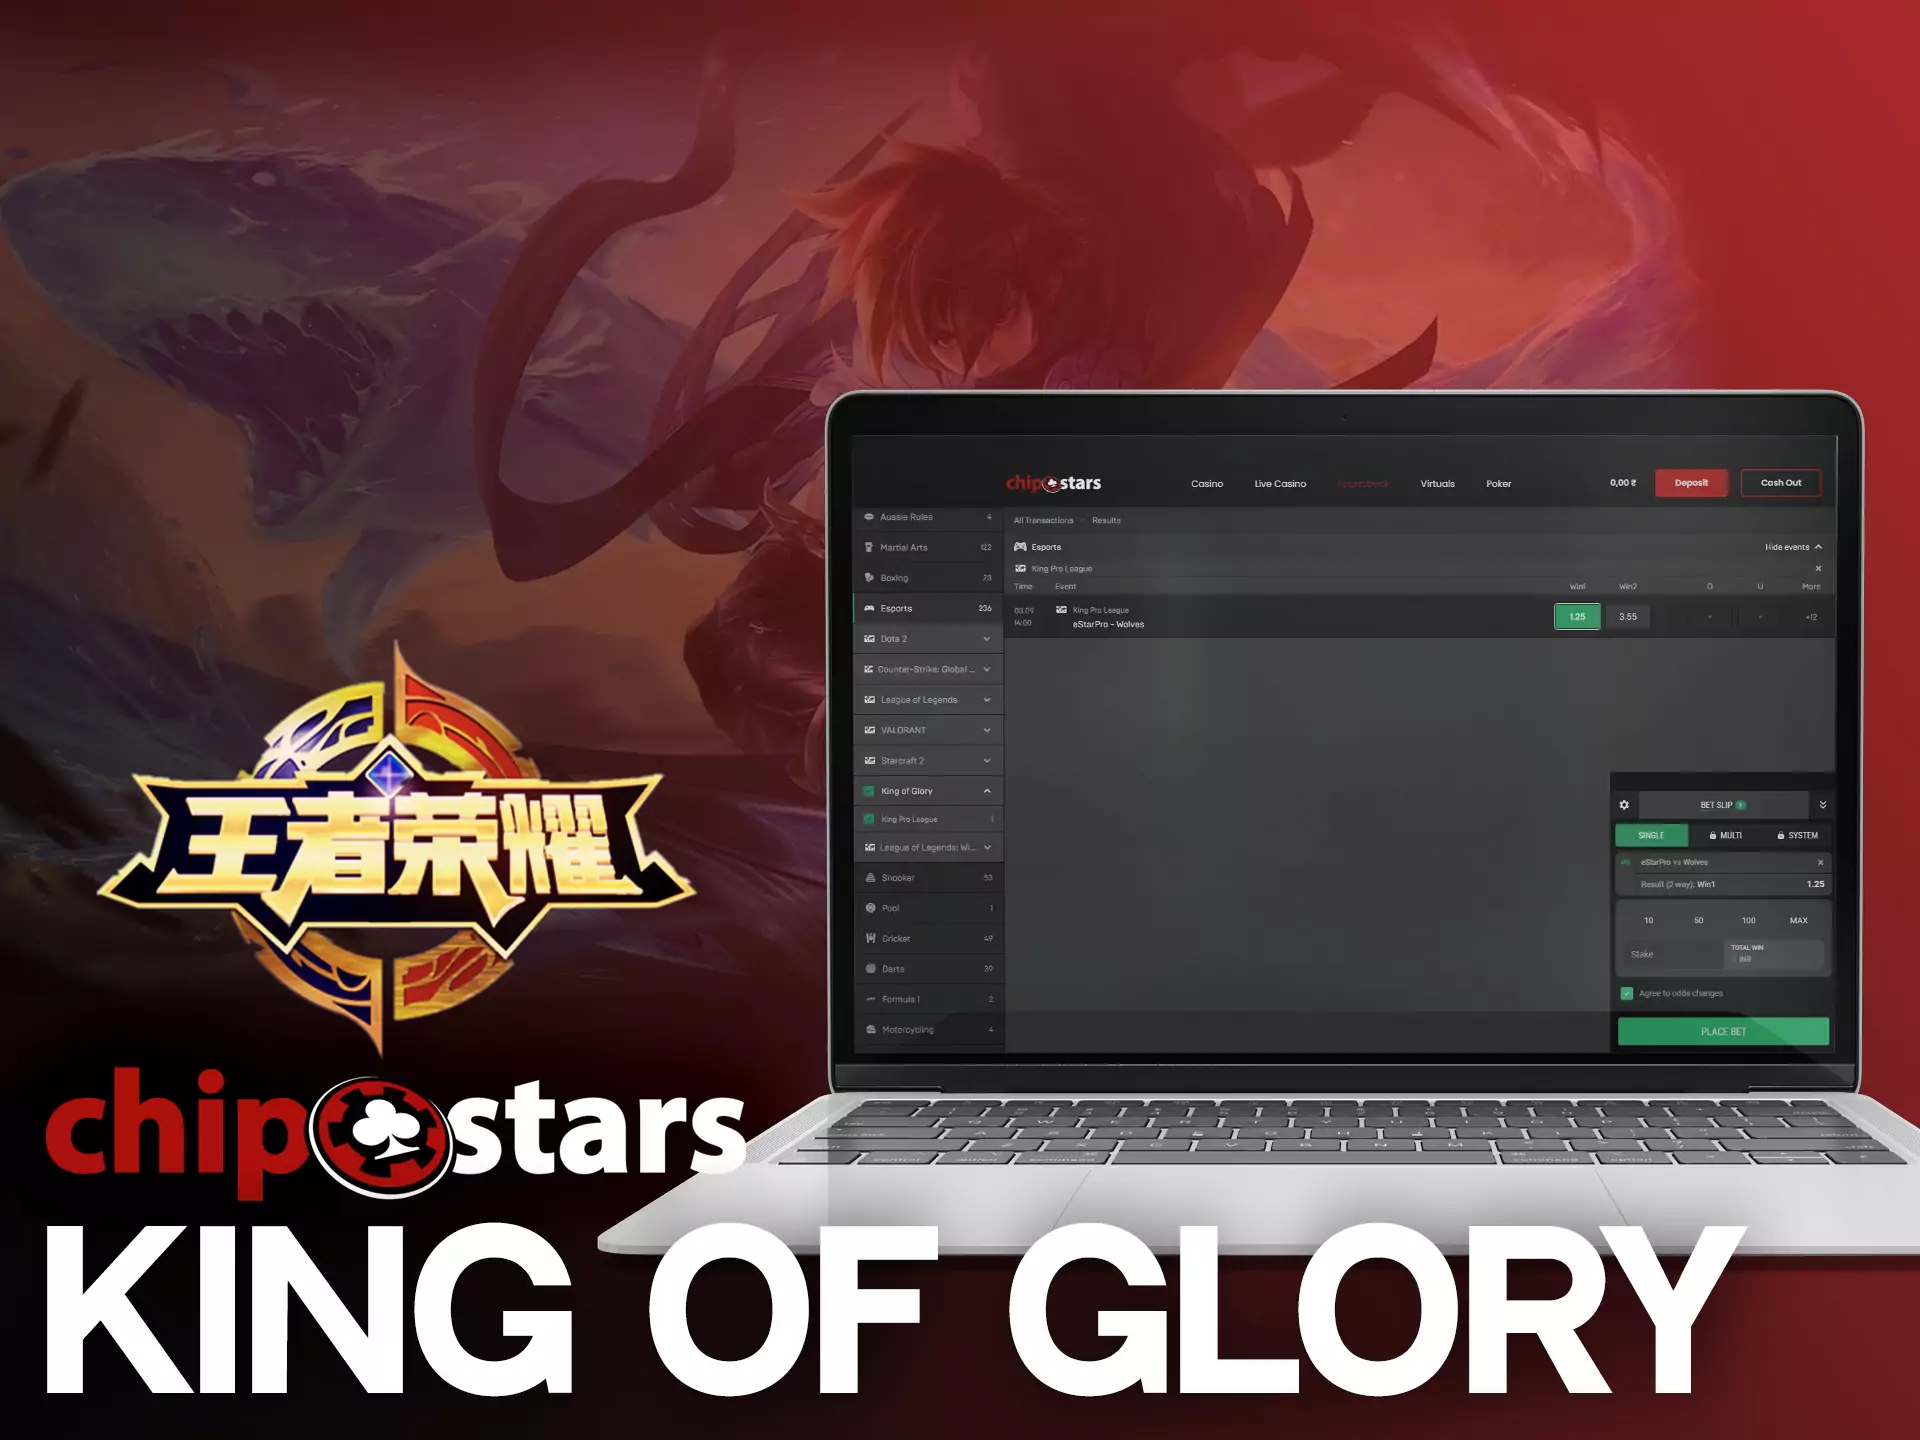 On the Chipstars site, you can place bets on King of Glory matches online.